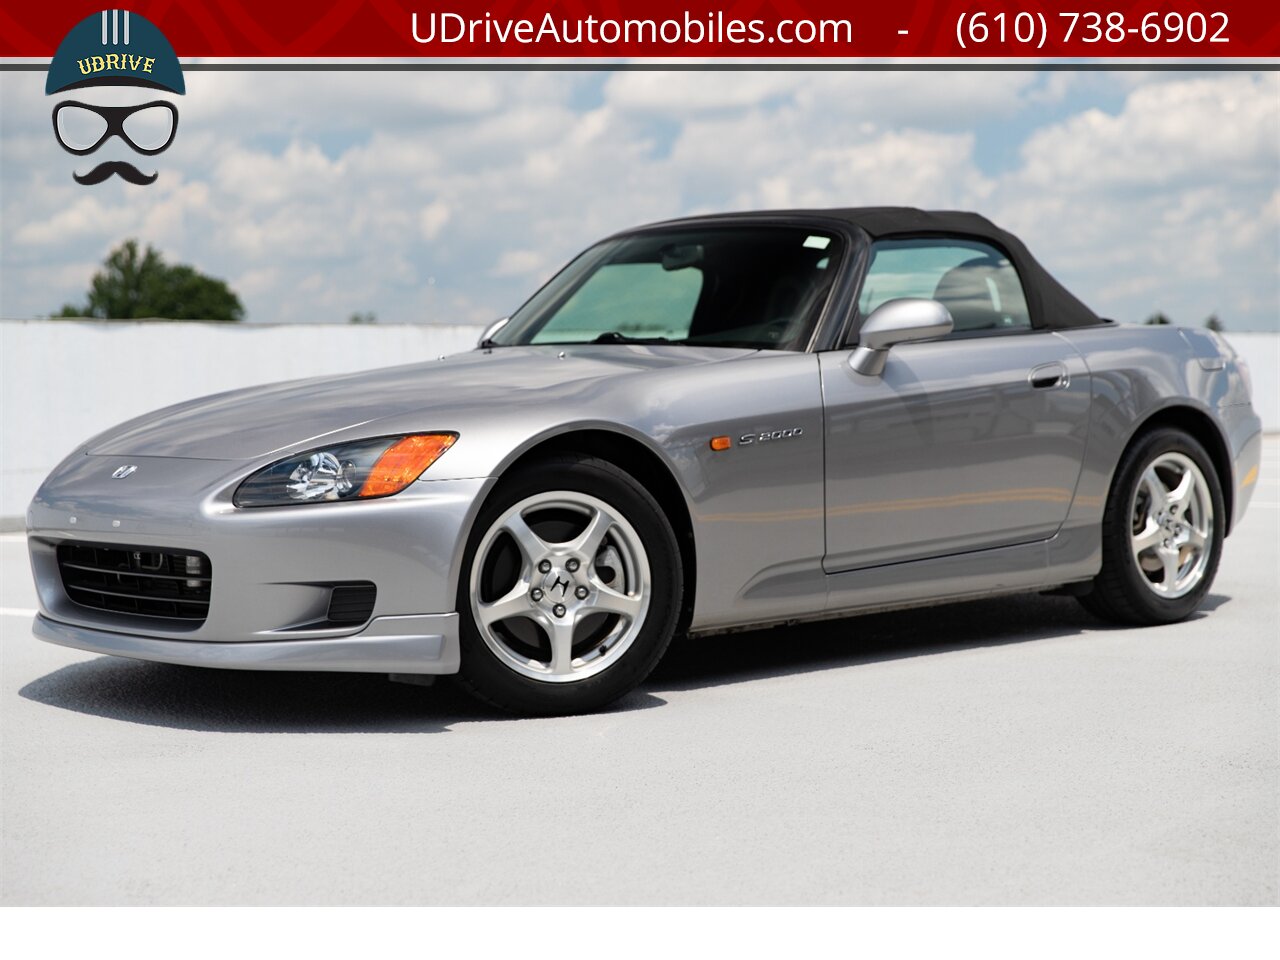 2001 Honda S2000 9k Miles Same Owner Since 2001 Service History   - Photo 2 - West Chester, PA 19382